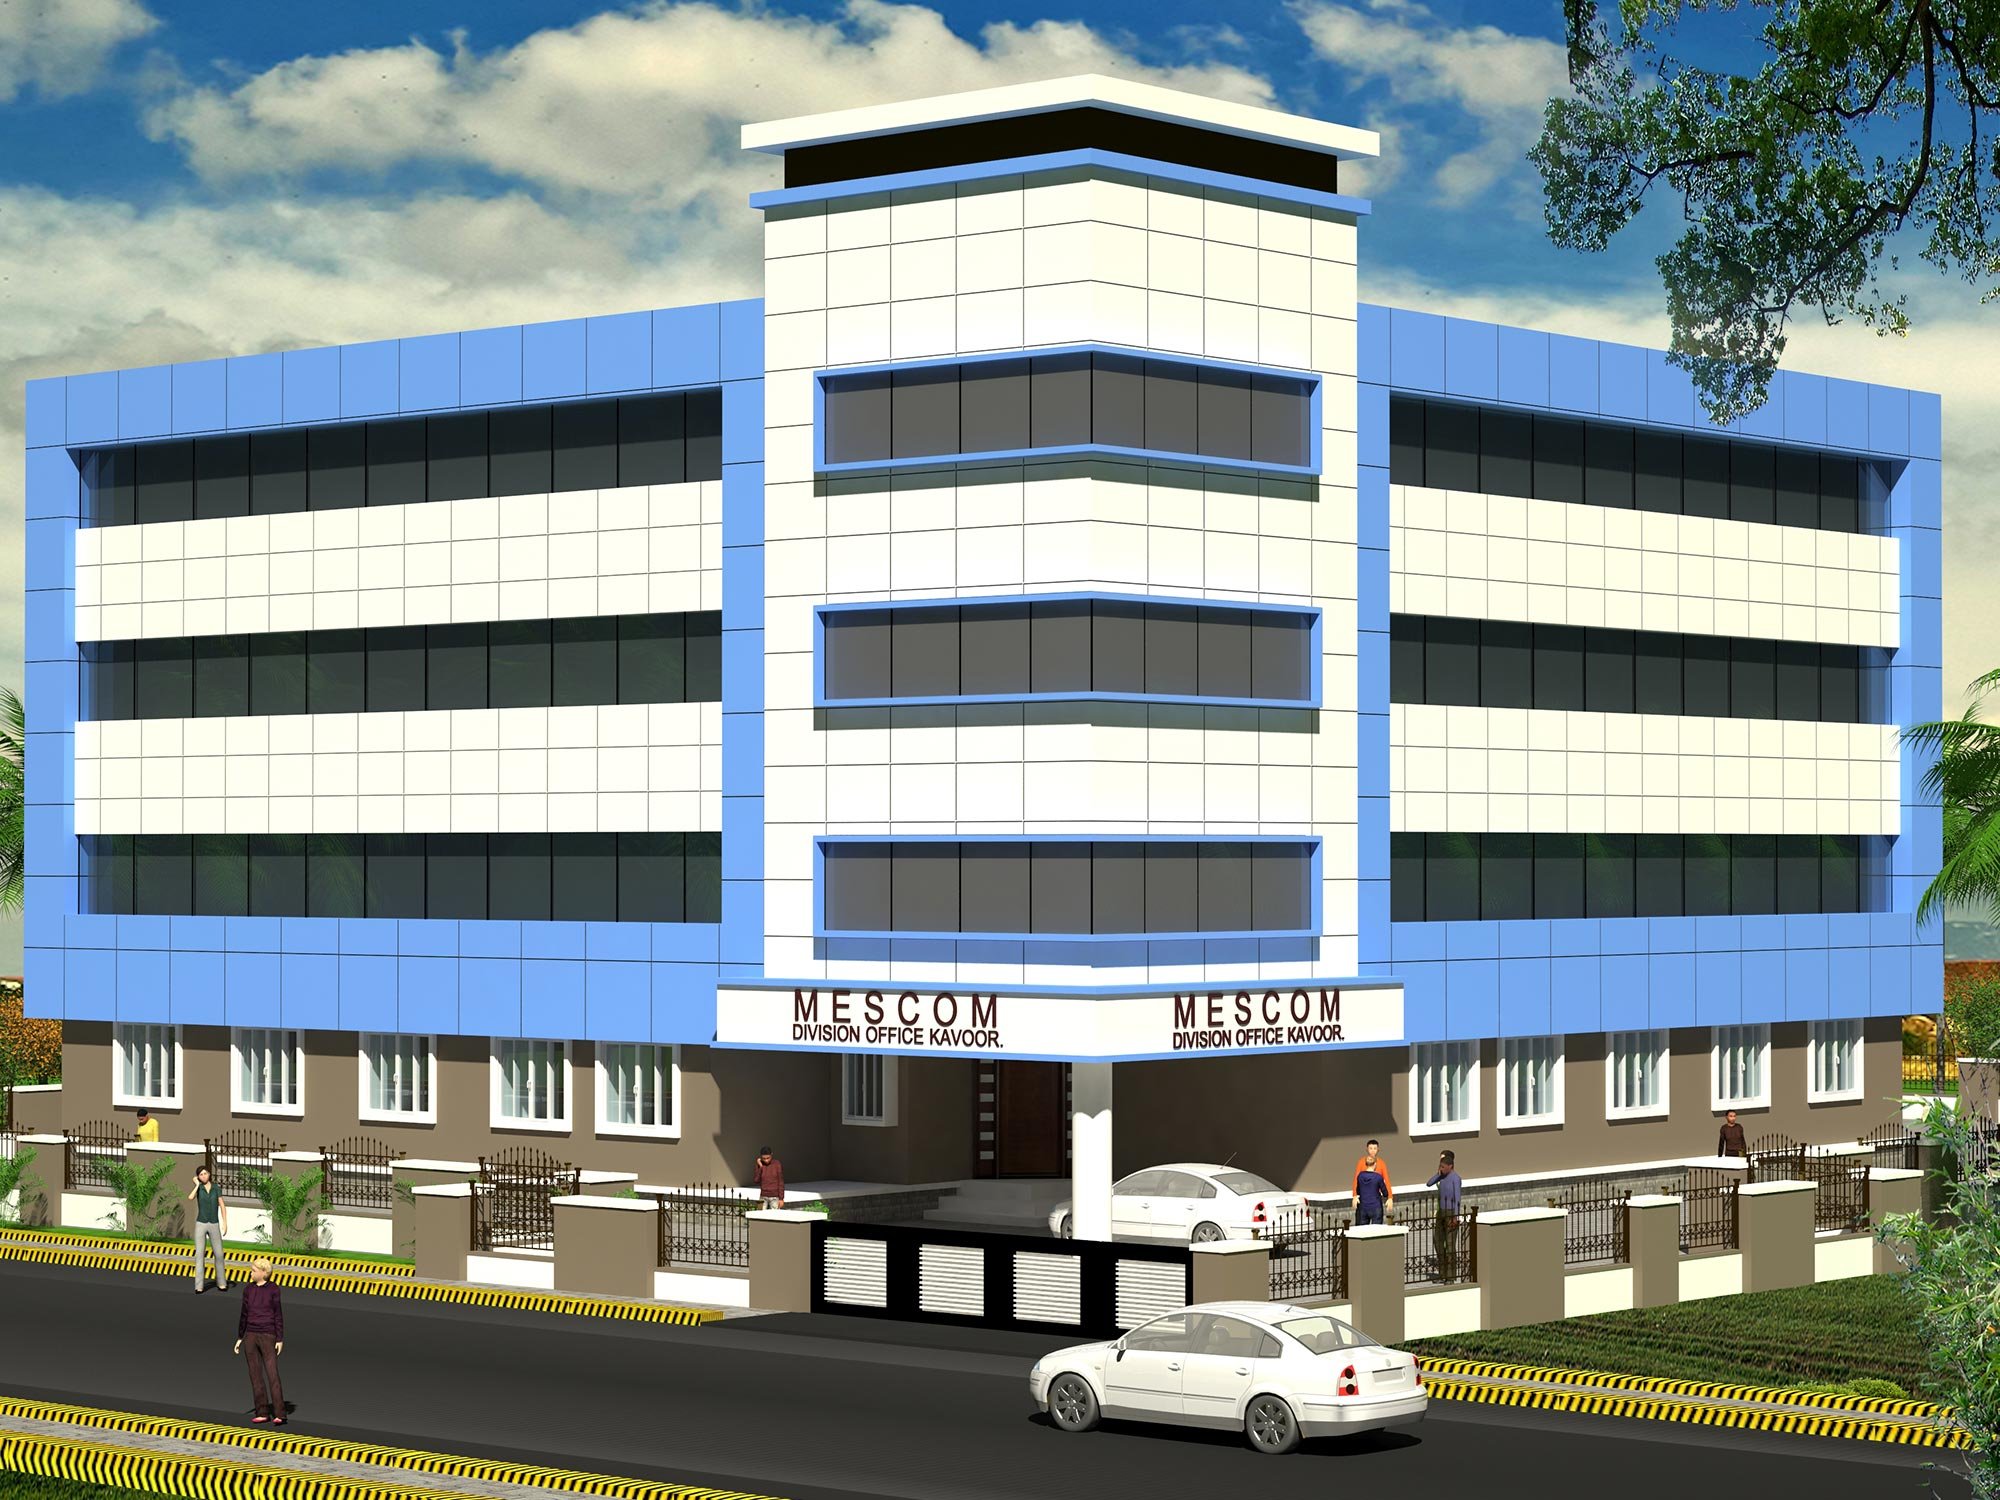 Mescom Division Office Kavoor